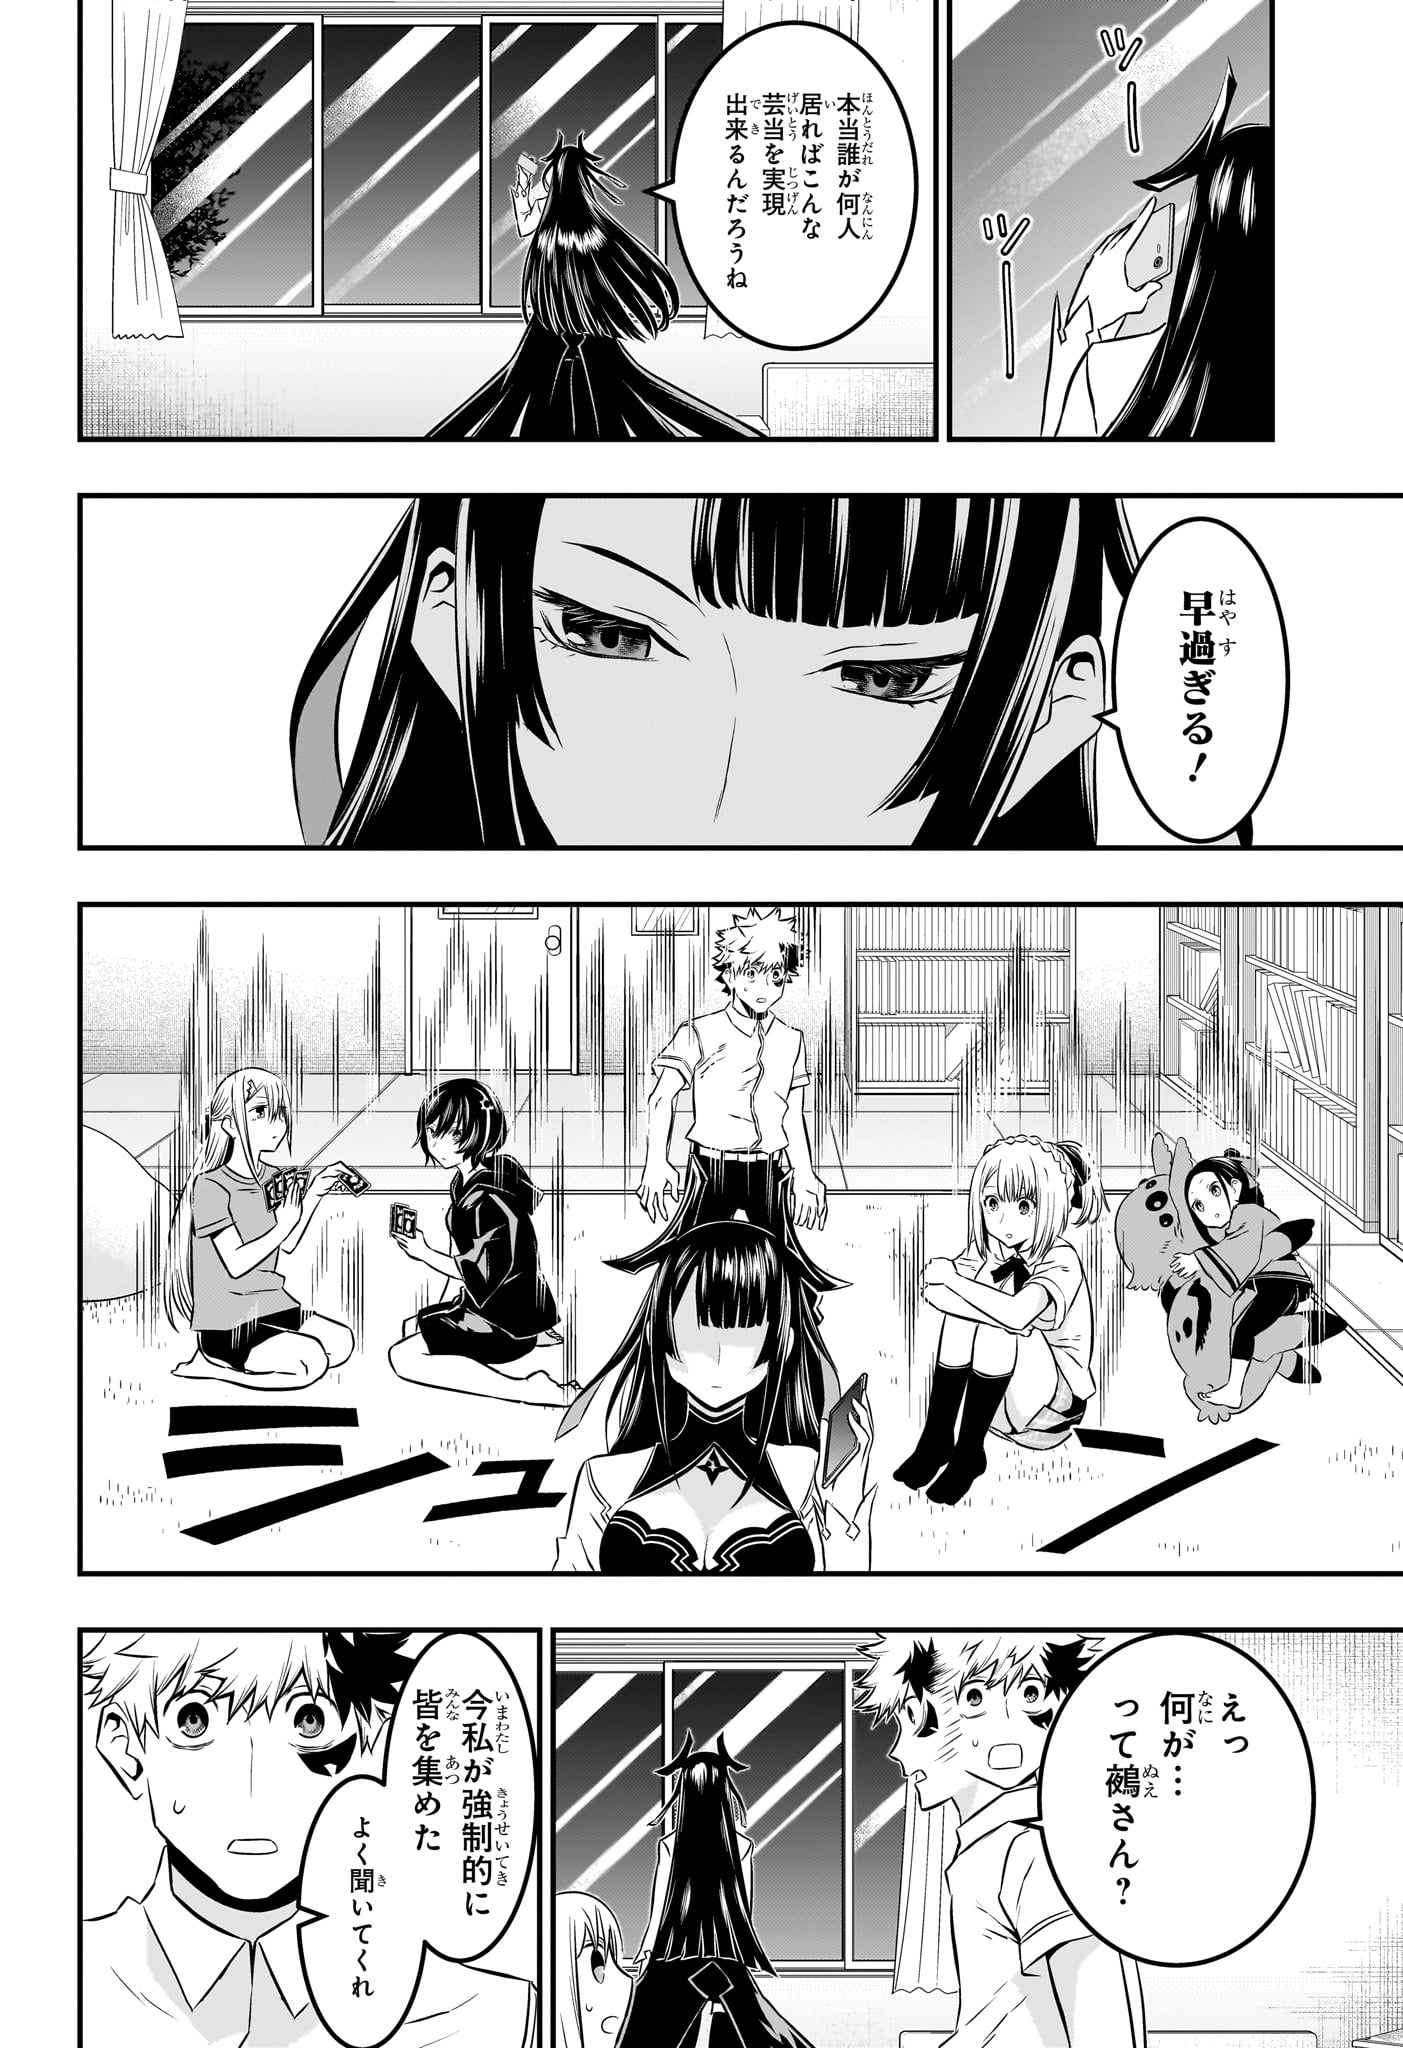 Nue no Onmyouji - Chapter 50 - Page 10